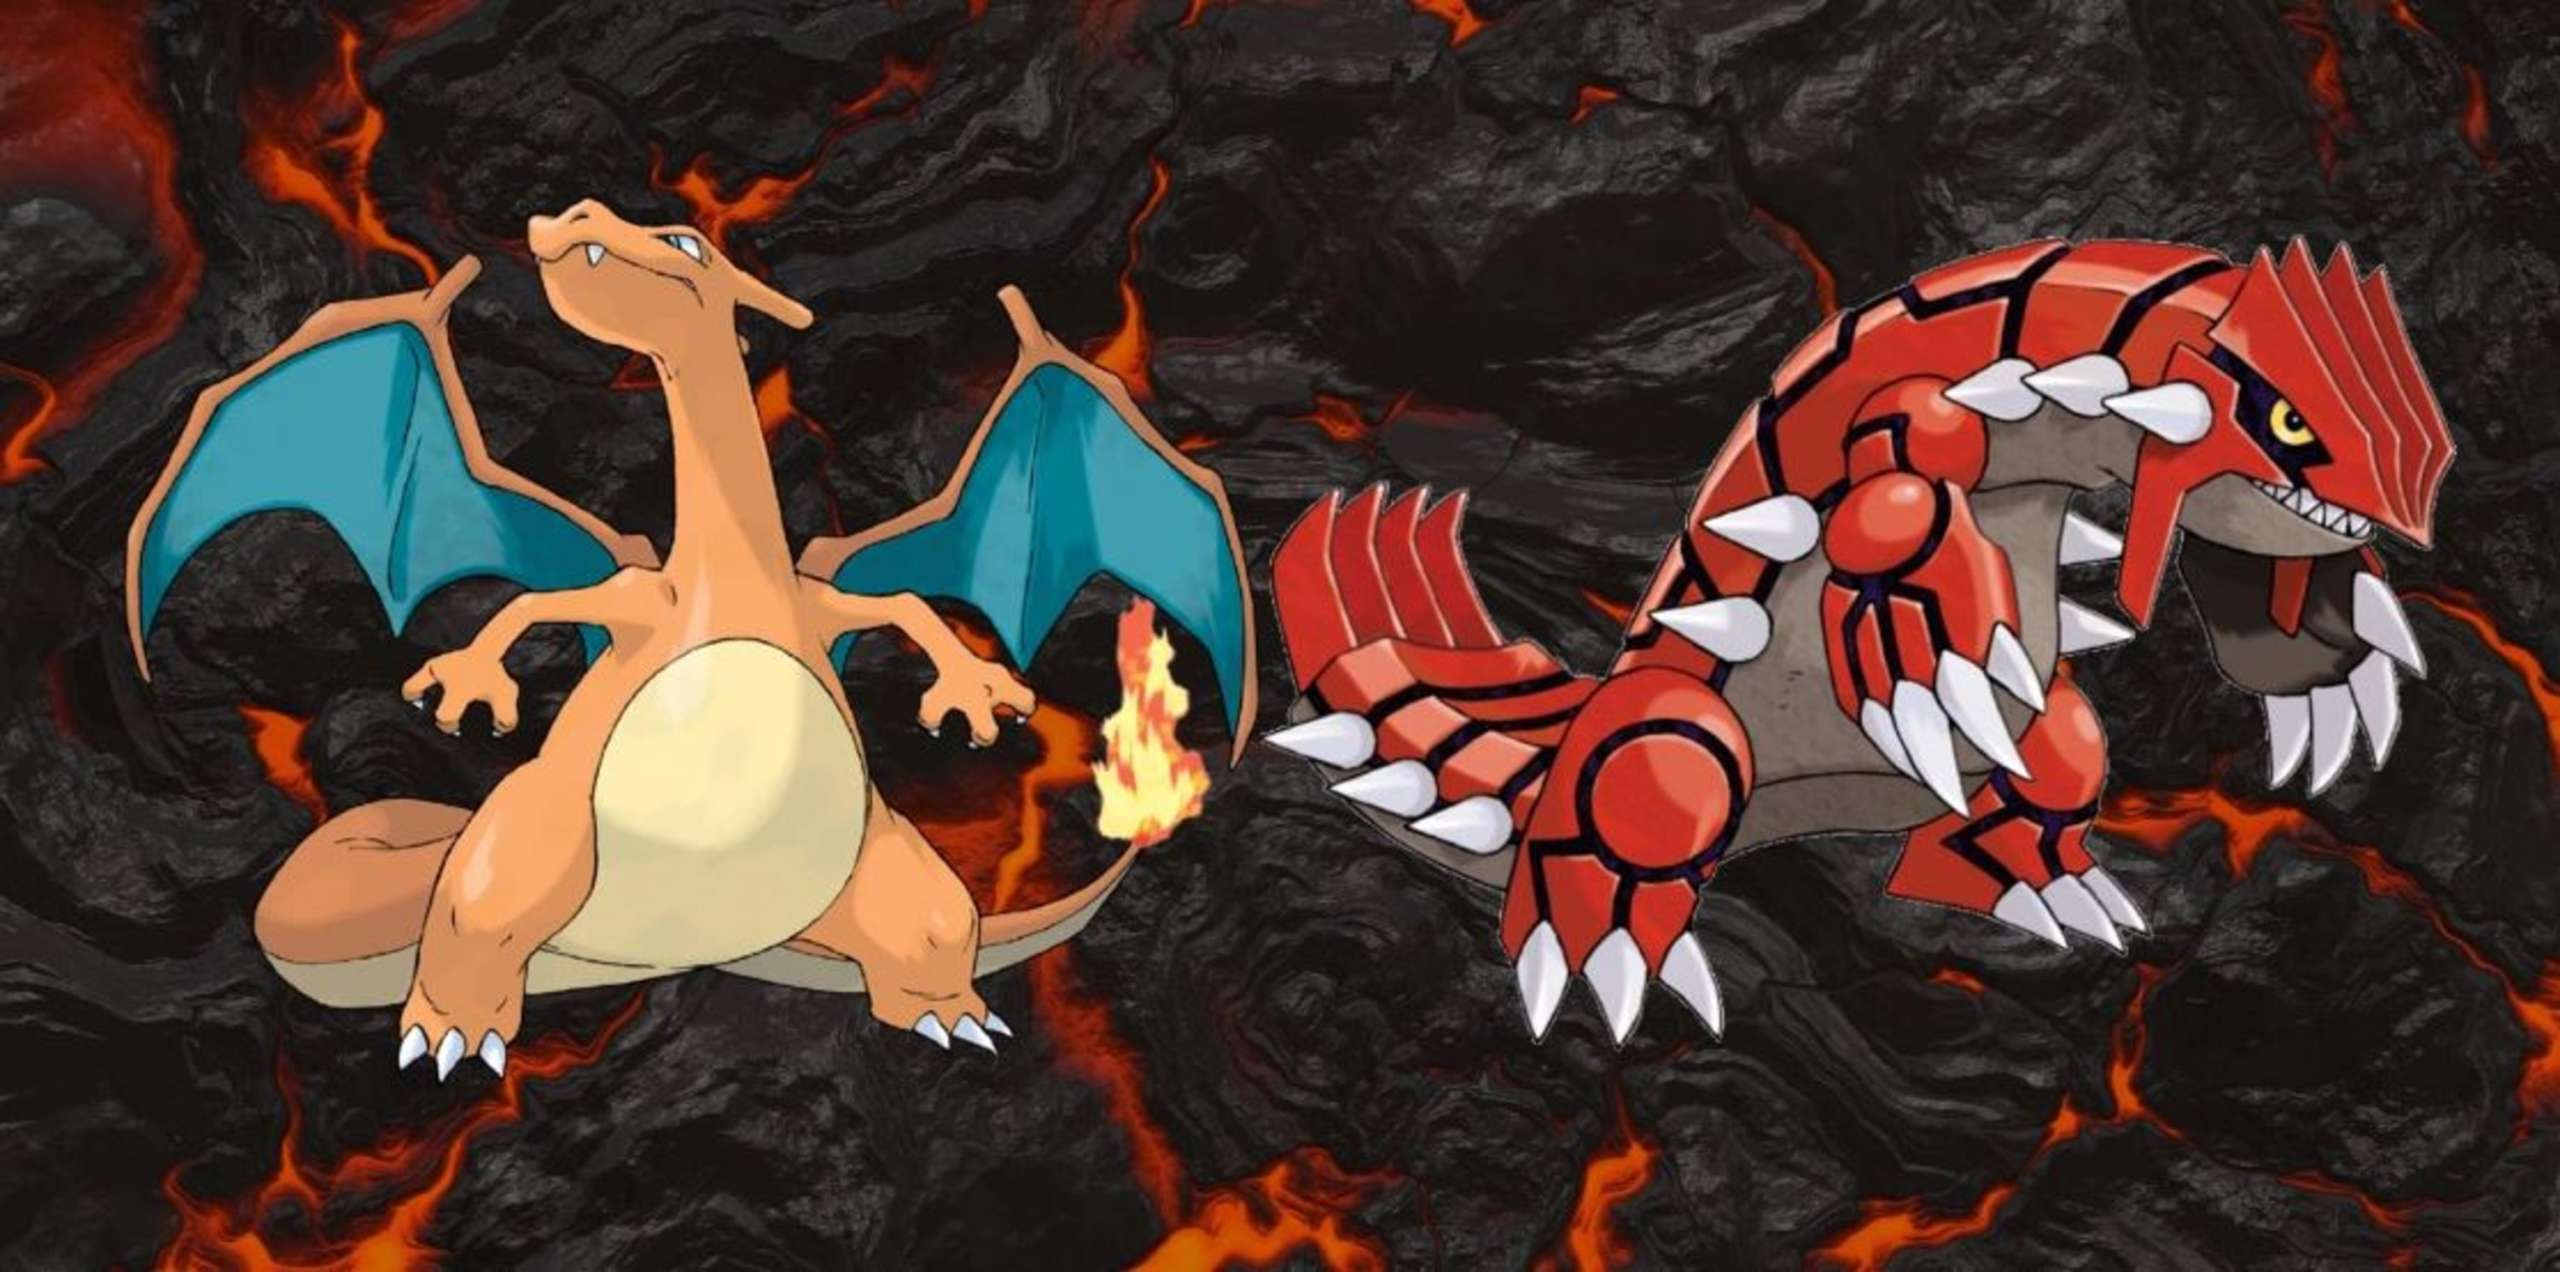 A Talented Pokemon Fan Has Combined The Two Wildly Popular Monsters,  Charizard And Groudon, To Create An Incredible Piece Of Artwork | Happy  Gamer